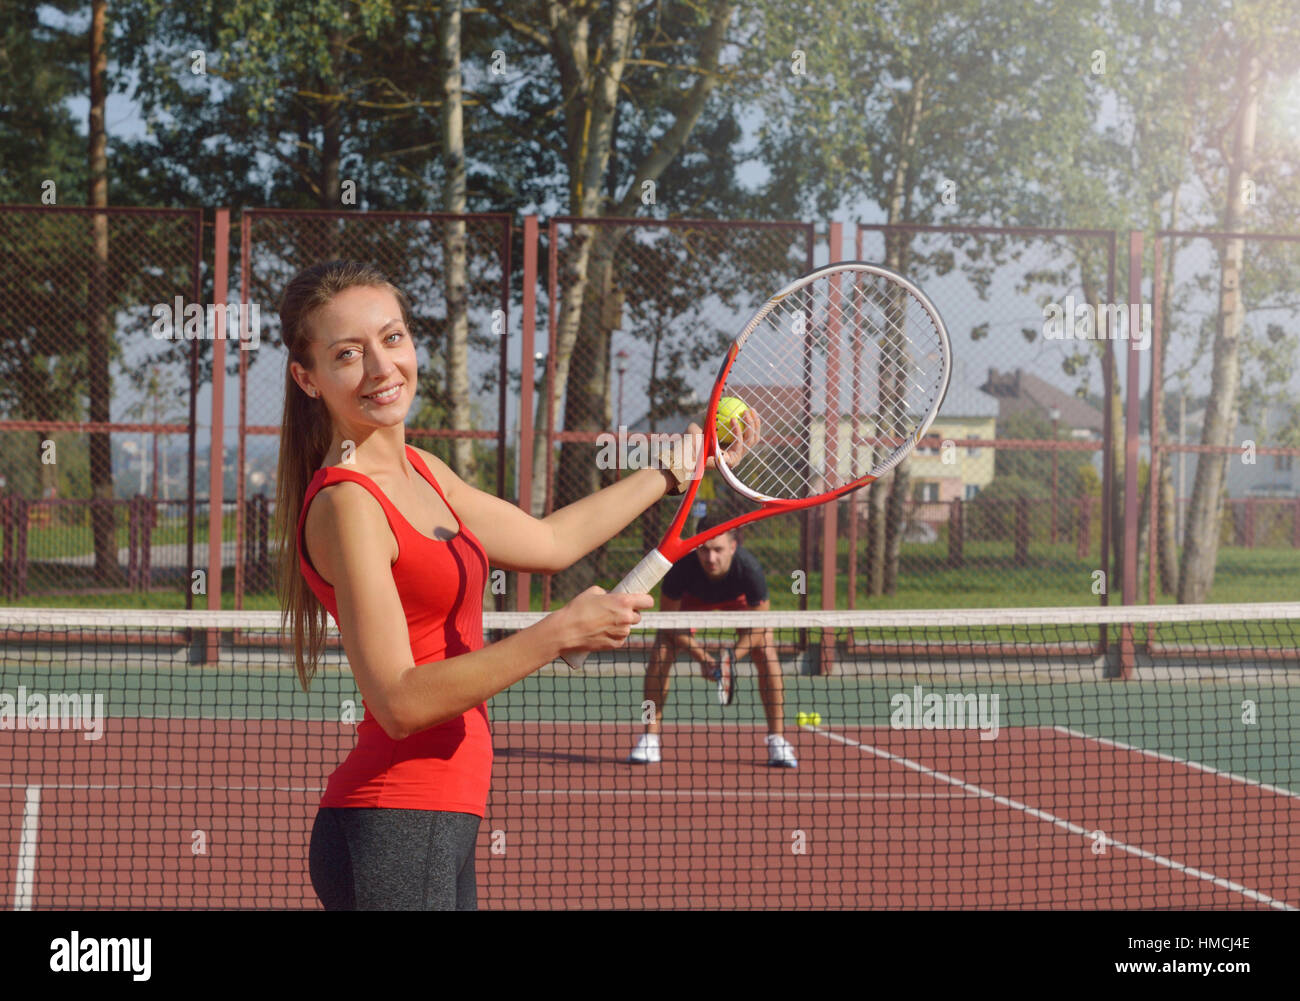 Woman playing tennis and preparing for sports competition. Women against men.Healthy fitness concept with active lifestyle. Stock Photo